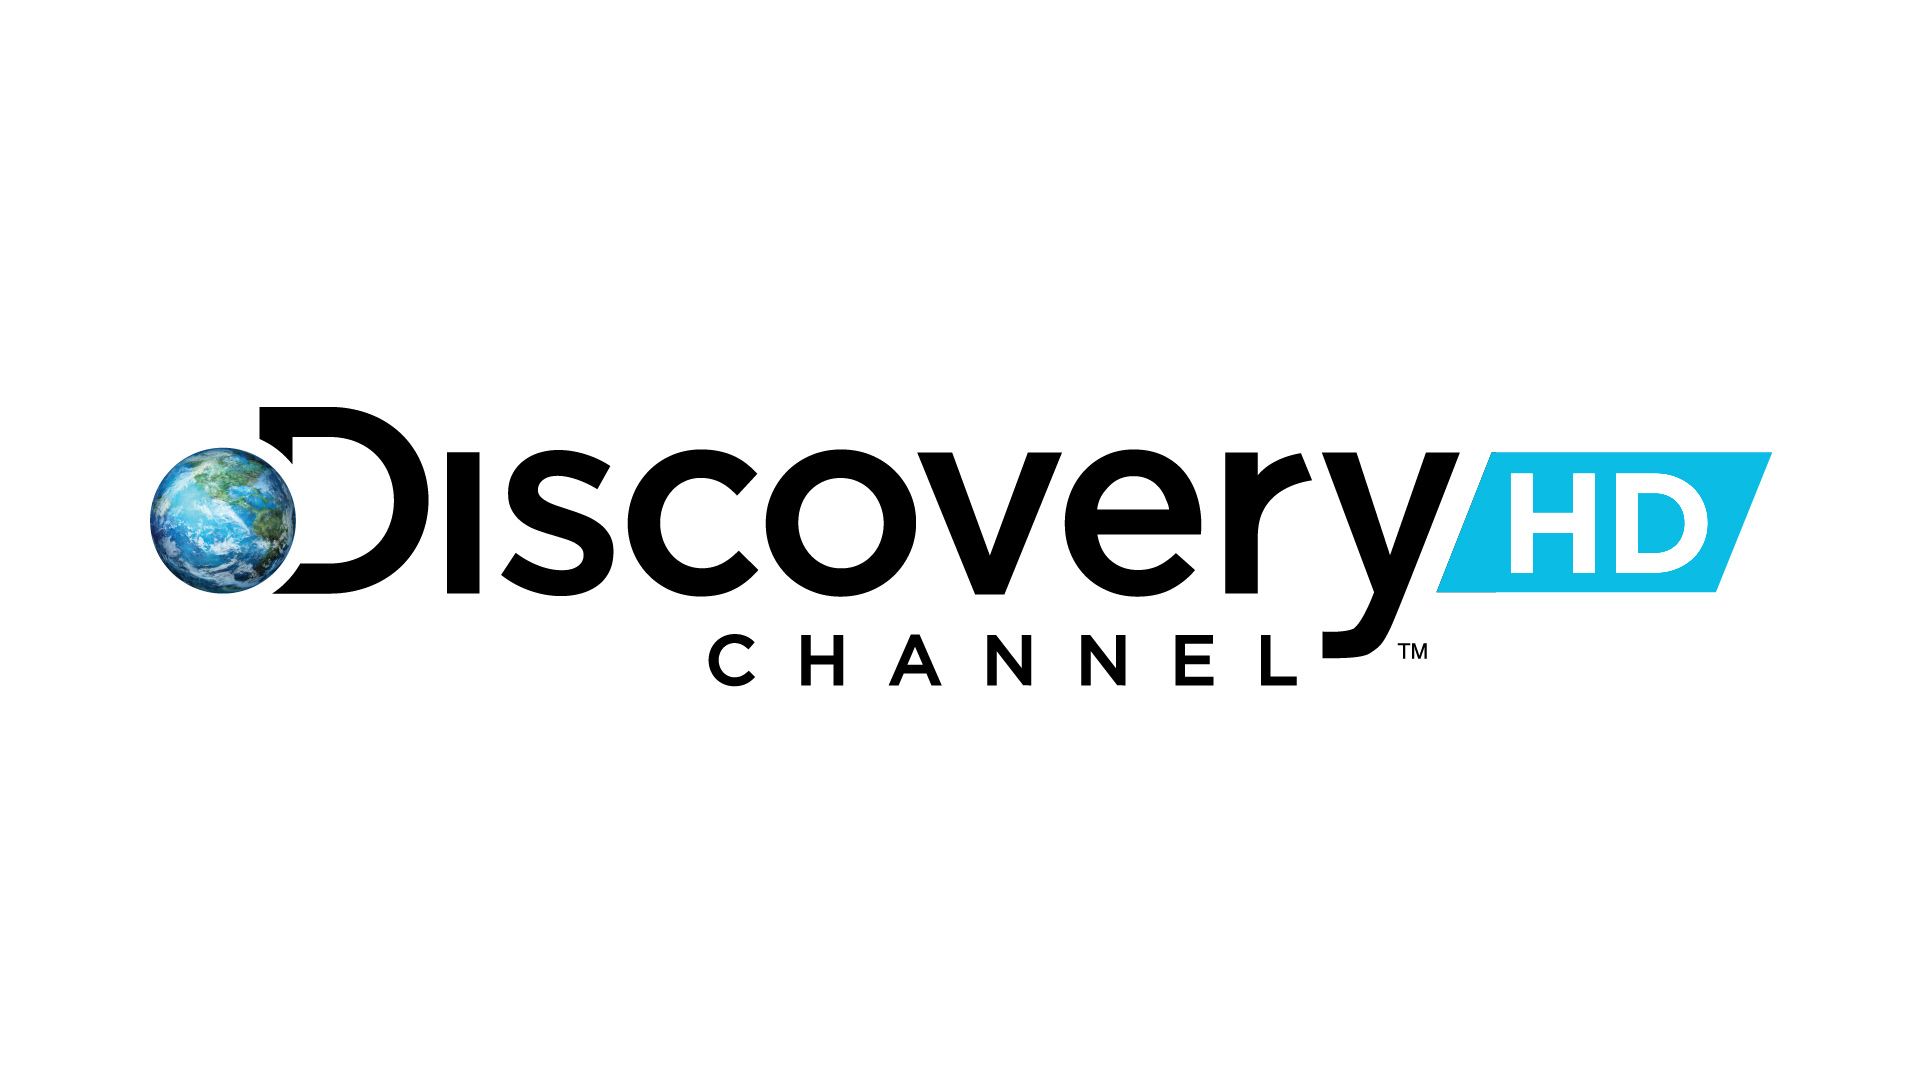 Wallpaper Discovery HD Showcase Channel